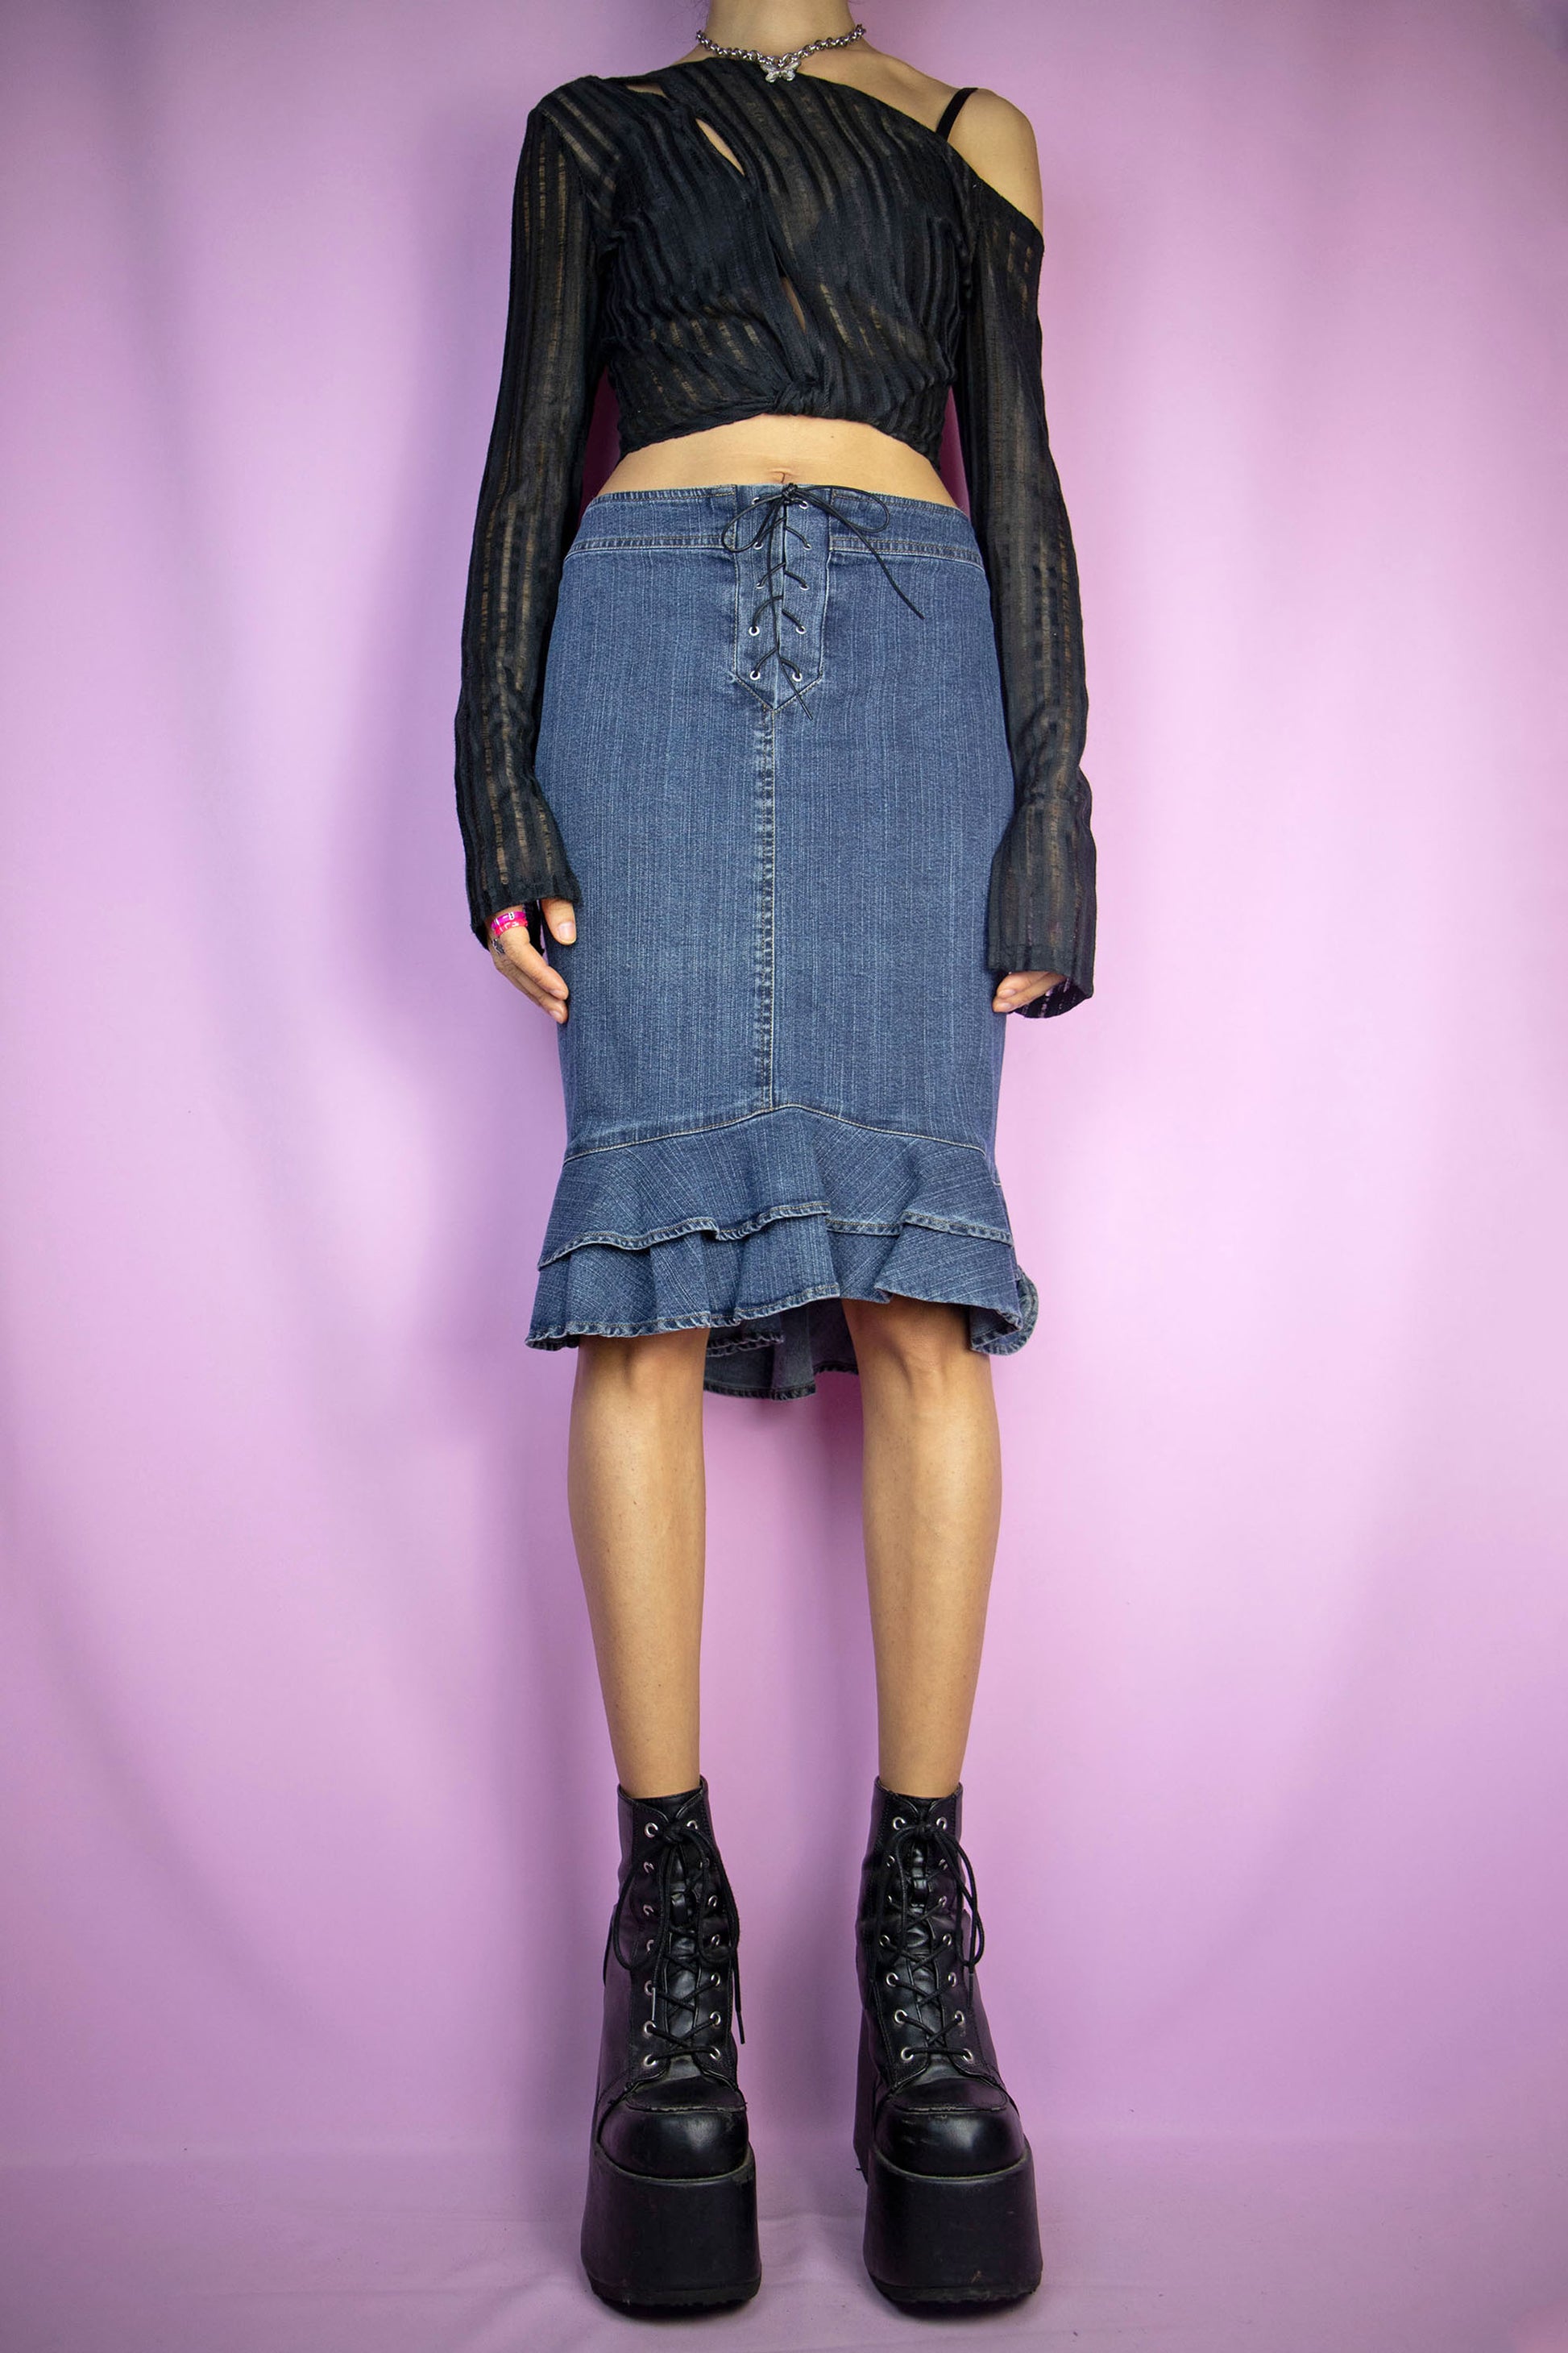 The Vintage Y2K Ruffle Hem Denim Skirt is a sleek dark denim trumpet skirt with a charming ruffled hem, back zipper closure, and lace-up tie front. This iconic cyber pencil jean mini skirt captures the essence of 2000s fashion.